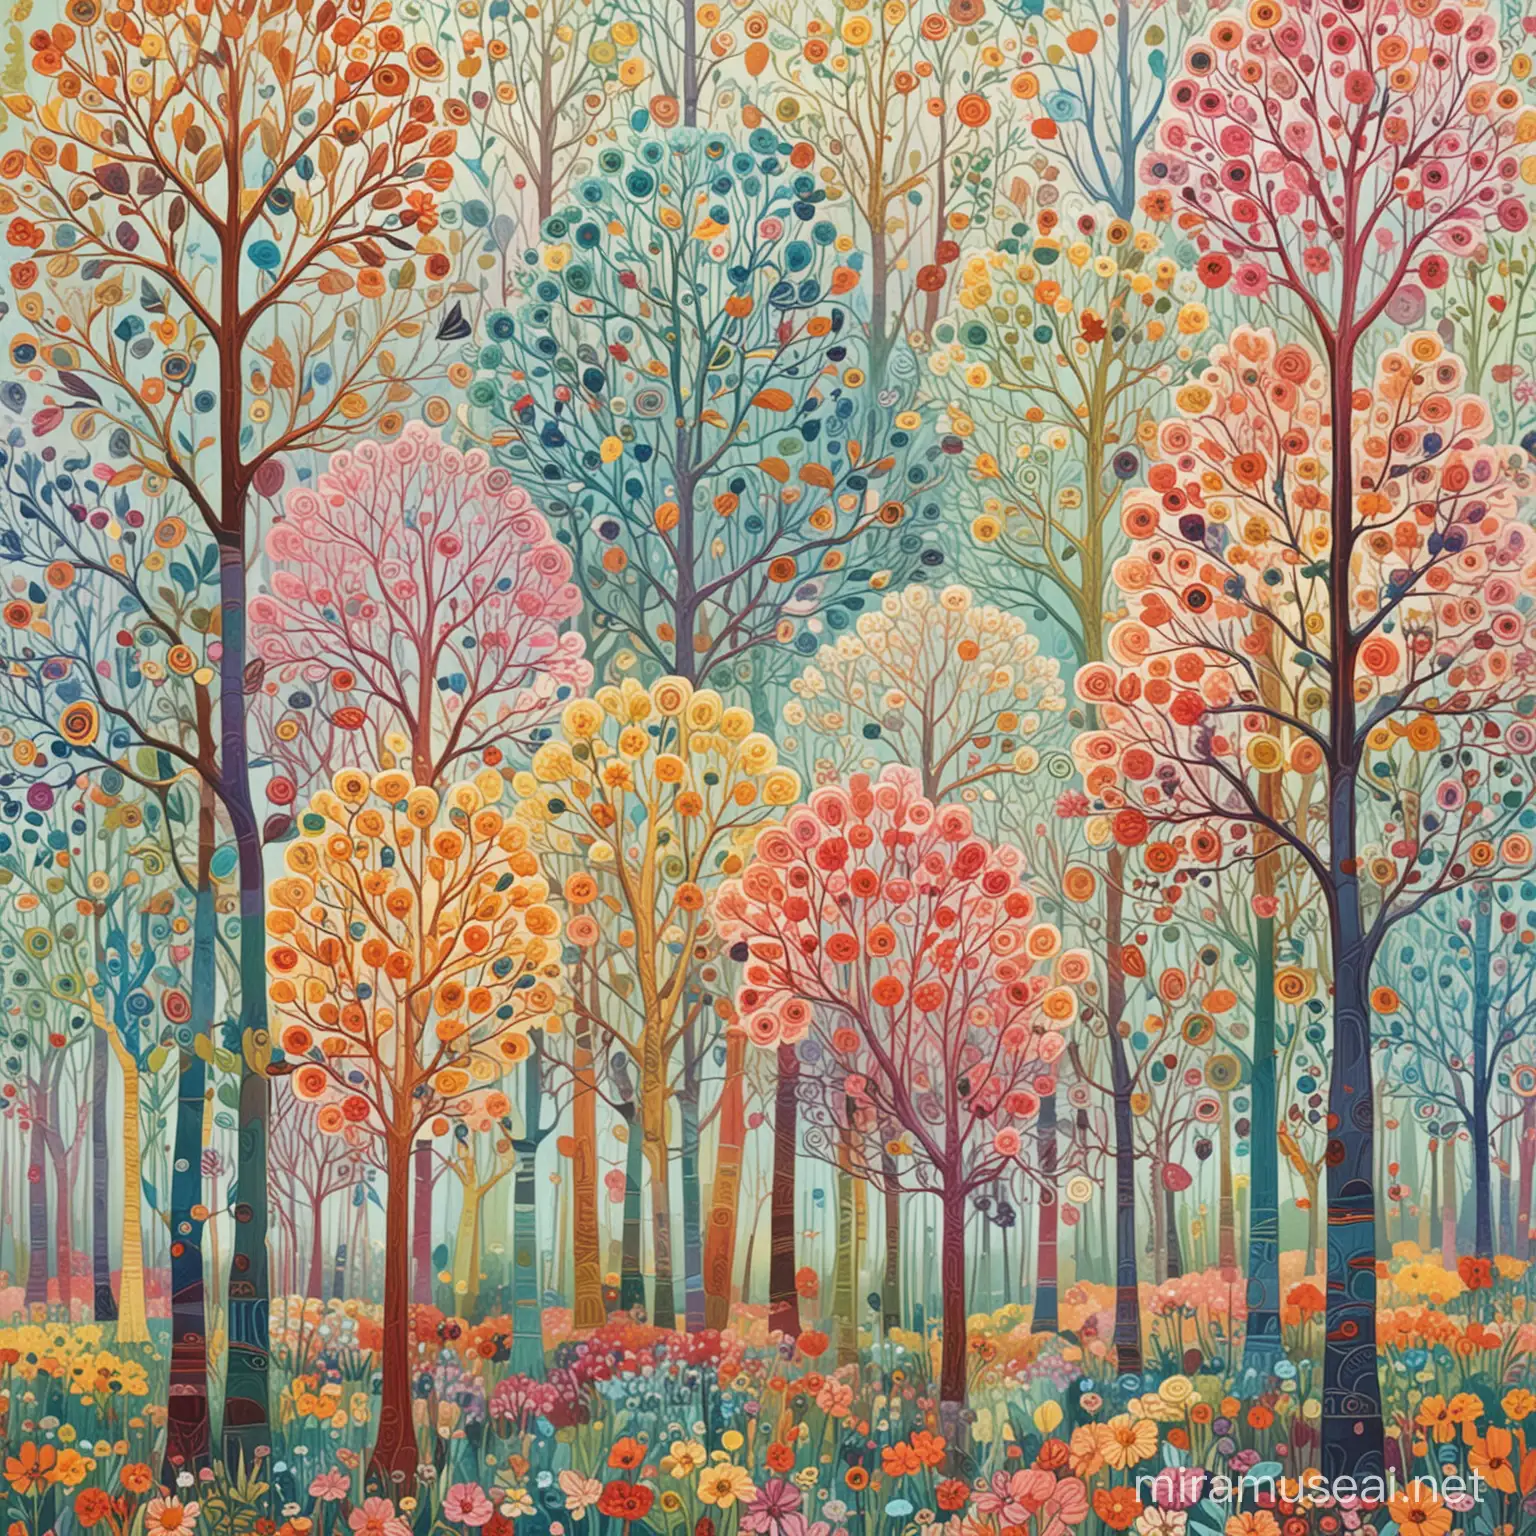 Whimsical Rainbow Forest Art Soft Colored Trees and Flowers